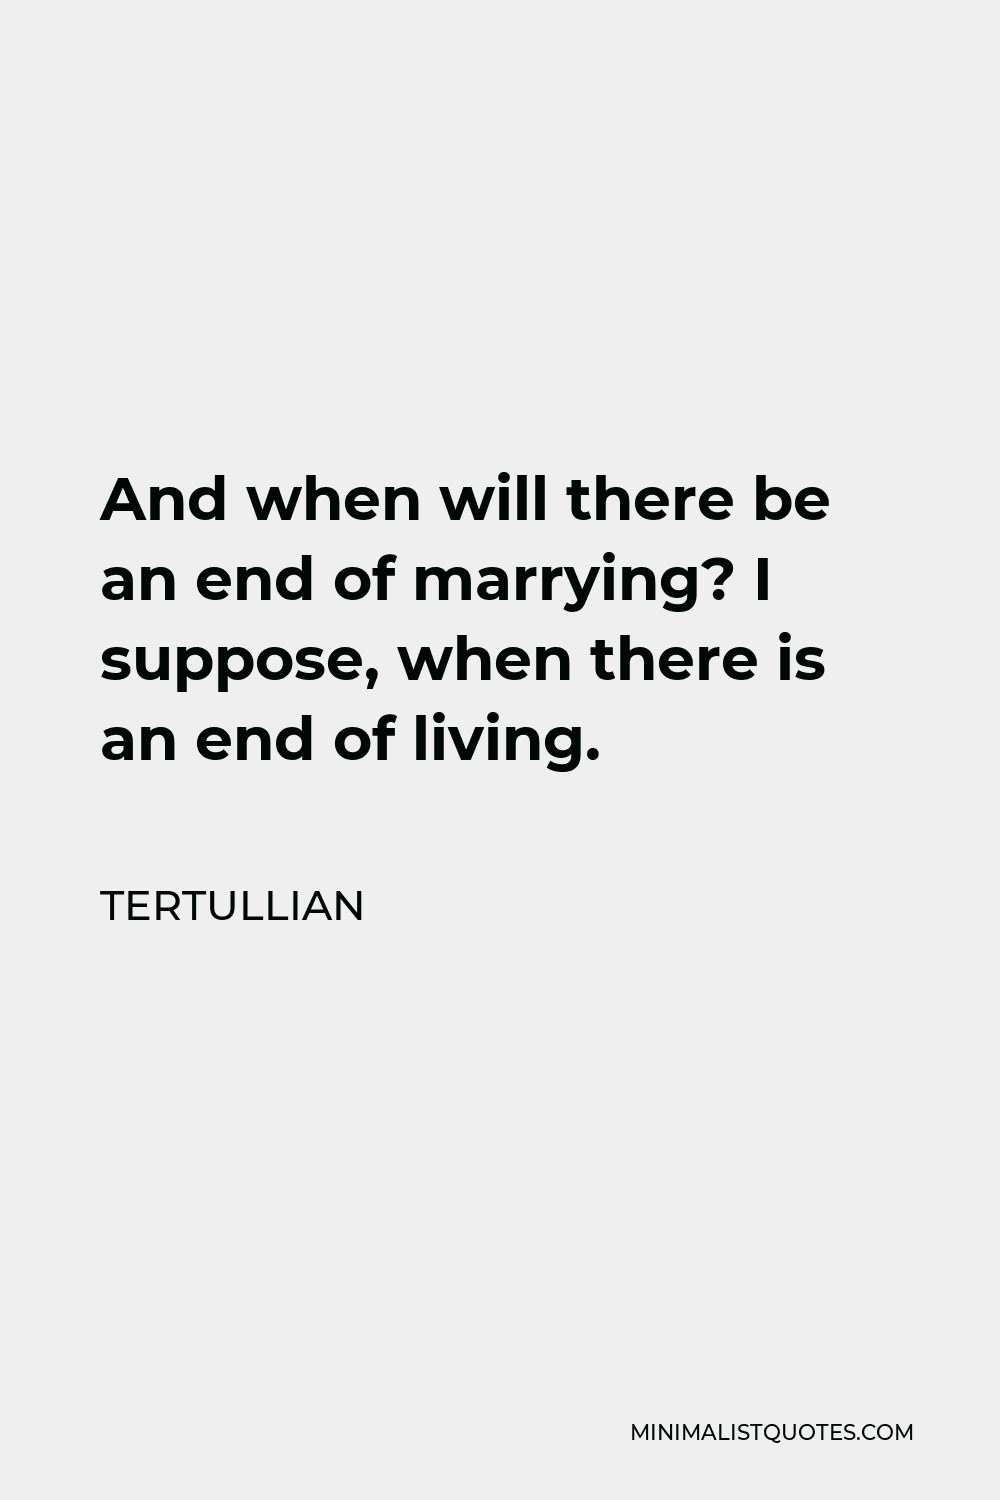 Tertullian Quote - And when will there be an end of marrying? I suppose, when there is an end of living.